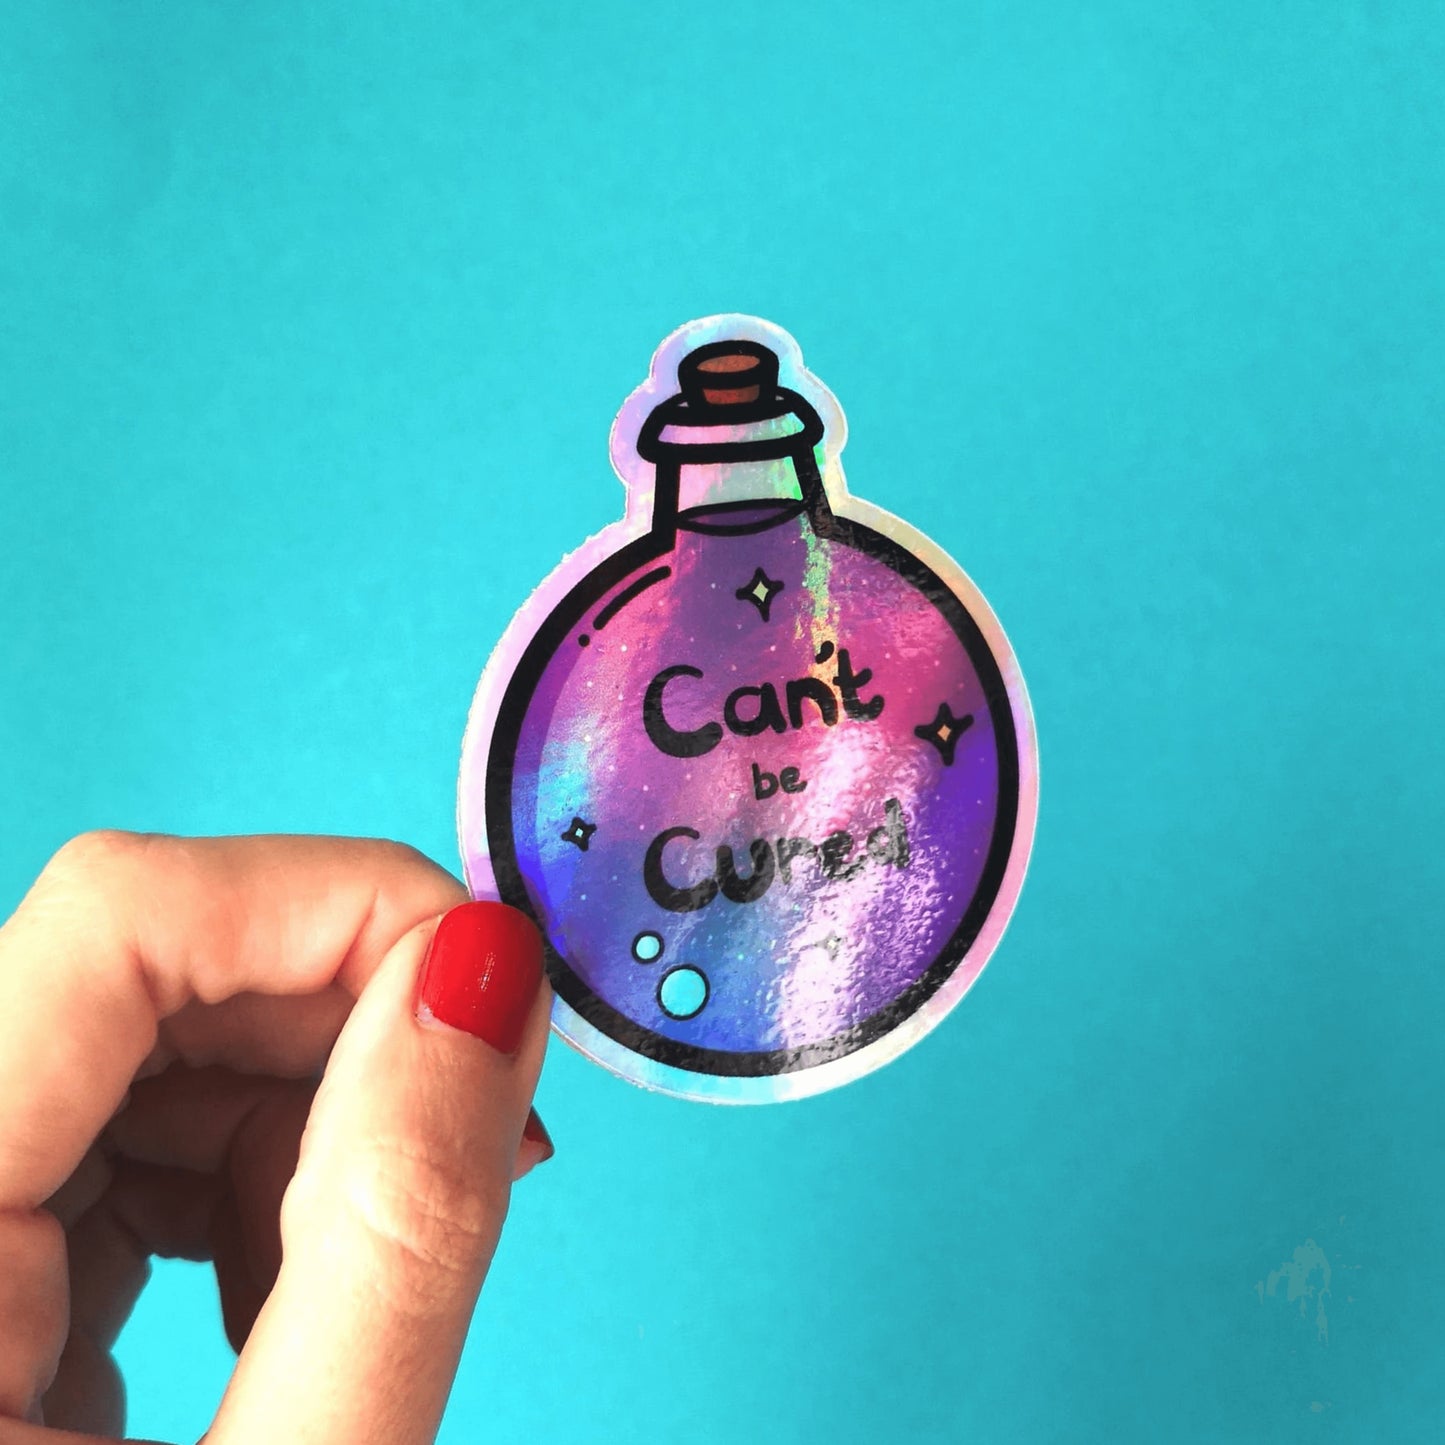 The Can't Be Cured Holographic Sticker being held over a blue background by a hand with red nail varnish. The sticker is a circular potion bottle with a cork stop top and purple middle. In the middle is white and yellow sparkles, two pastel pink bubbles and black text that reads 'can't be cured'. The design was inspired by chronic illnesses.